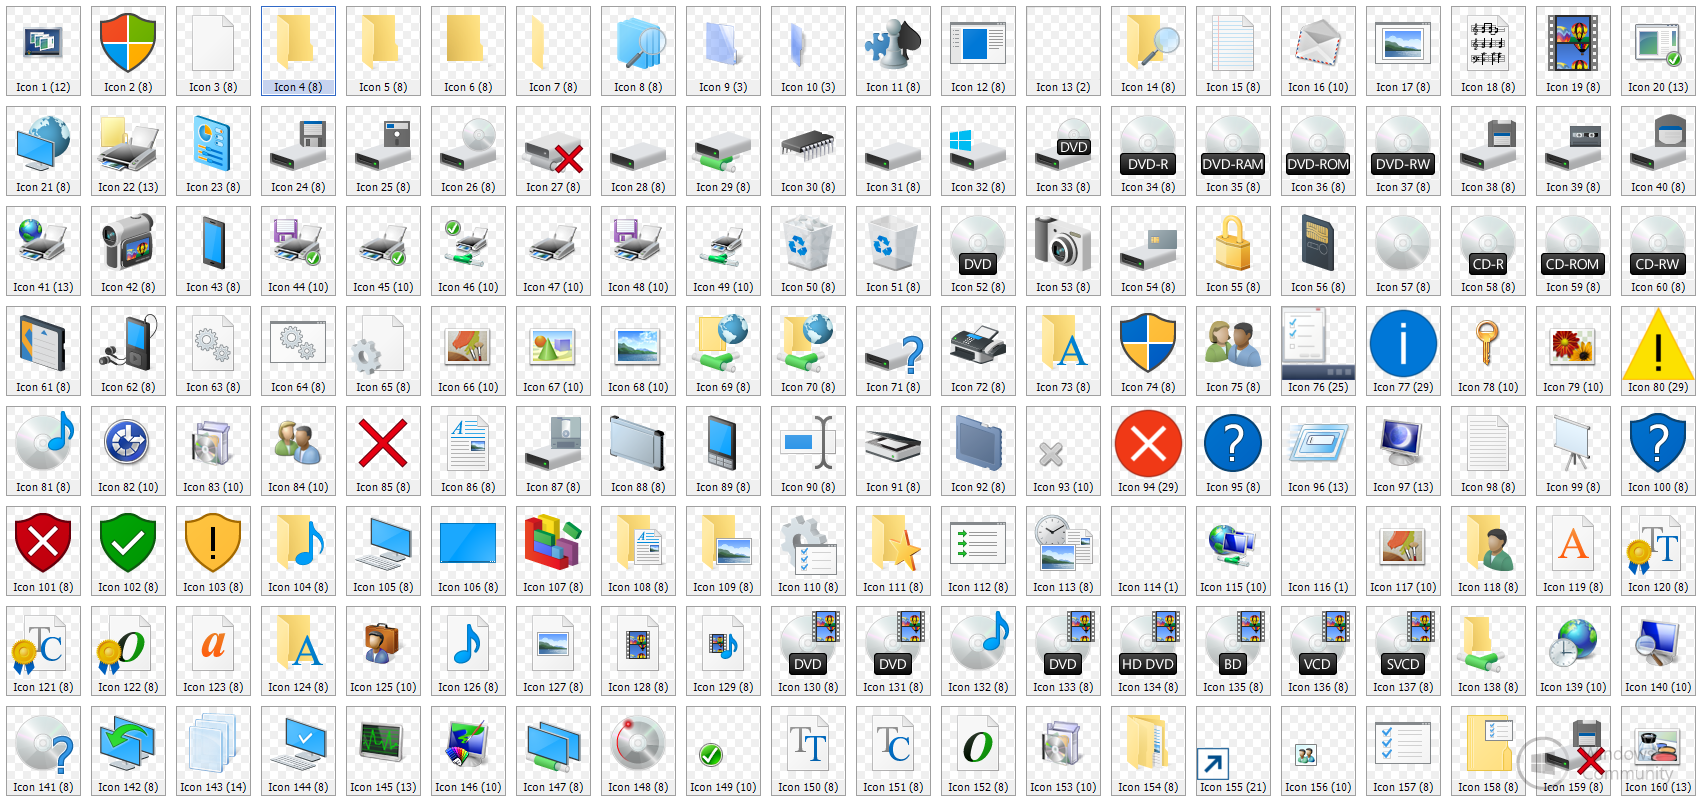 Windows 8 Style Icon and Wallpaper by h0p3bring3r 